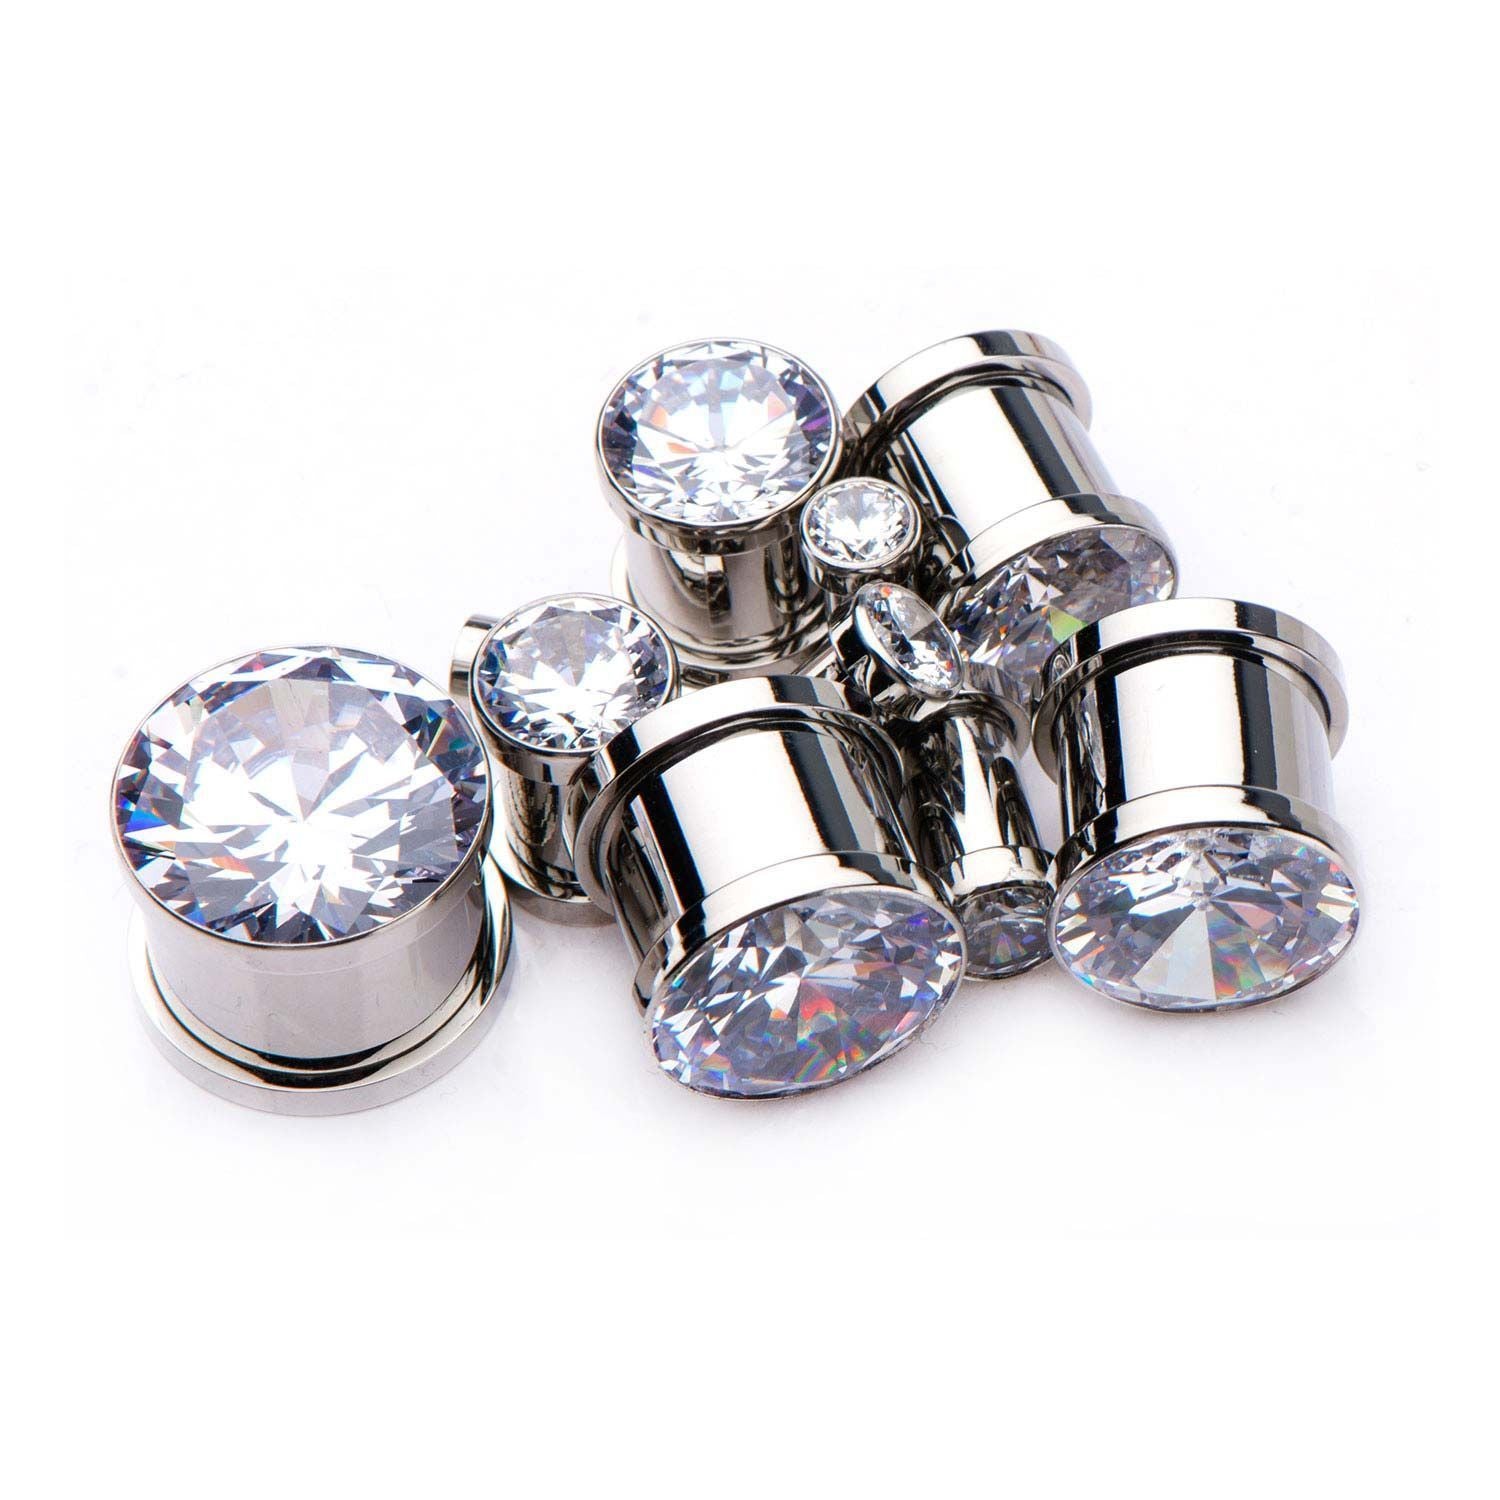 Screw Fit w/ Clear CZ in Front Plugs - 1 Pair sbvpssfcz